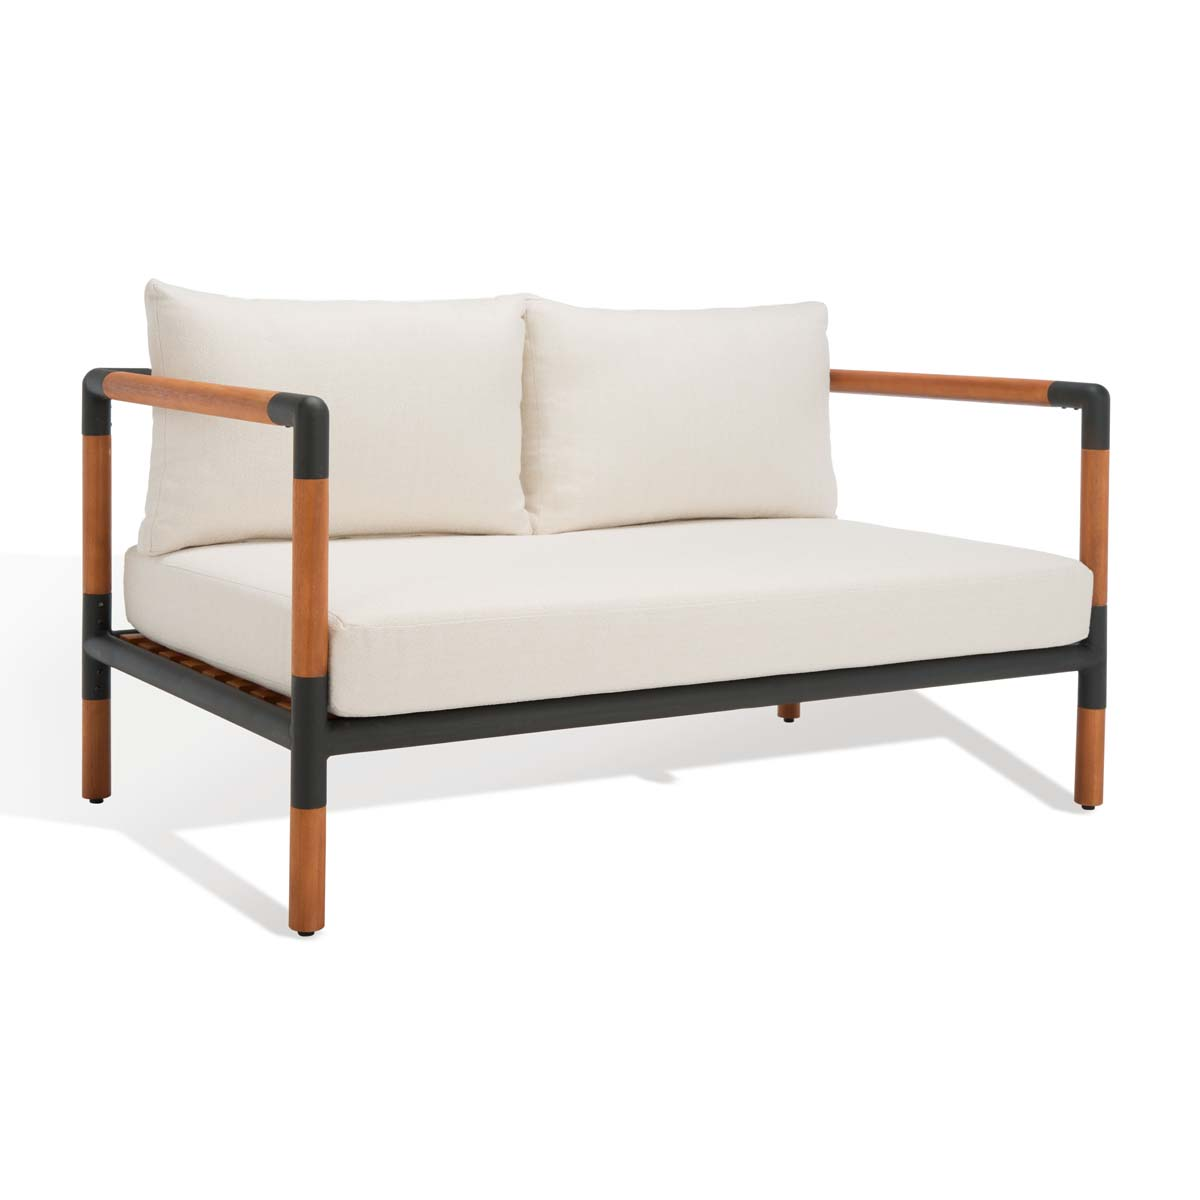 Safavieh Couture Tommy Metal And Wood Patio Sofa